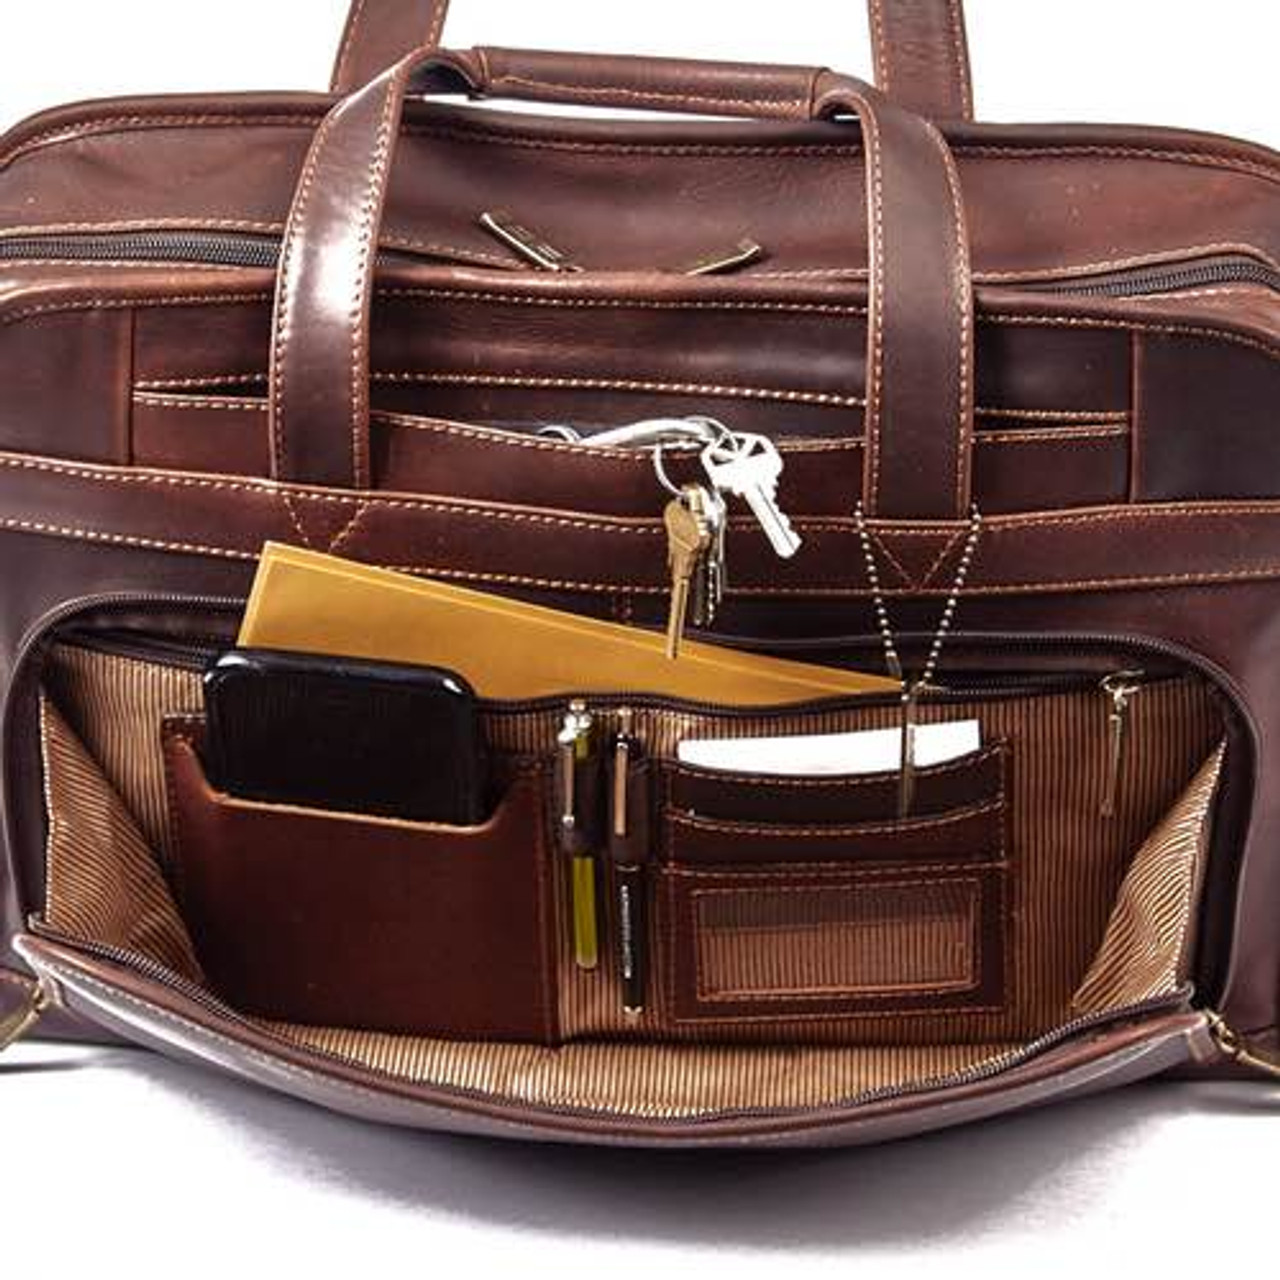 Claire Chase Legendary Professional Briefcase